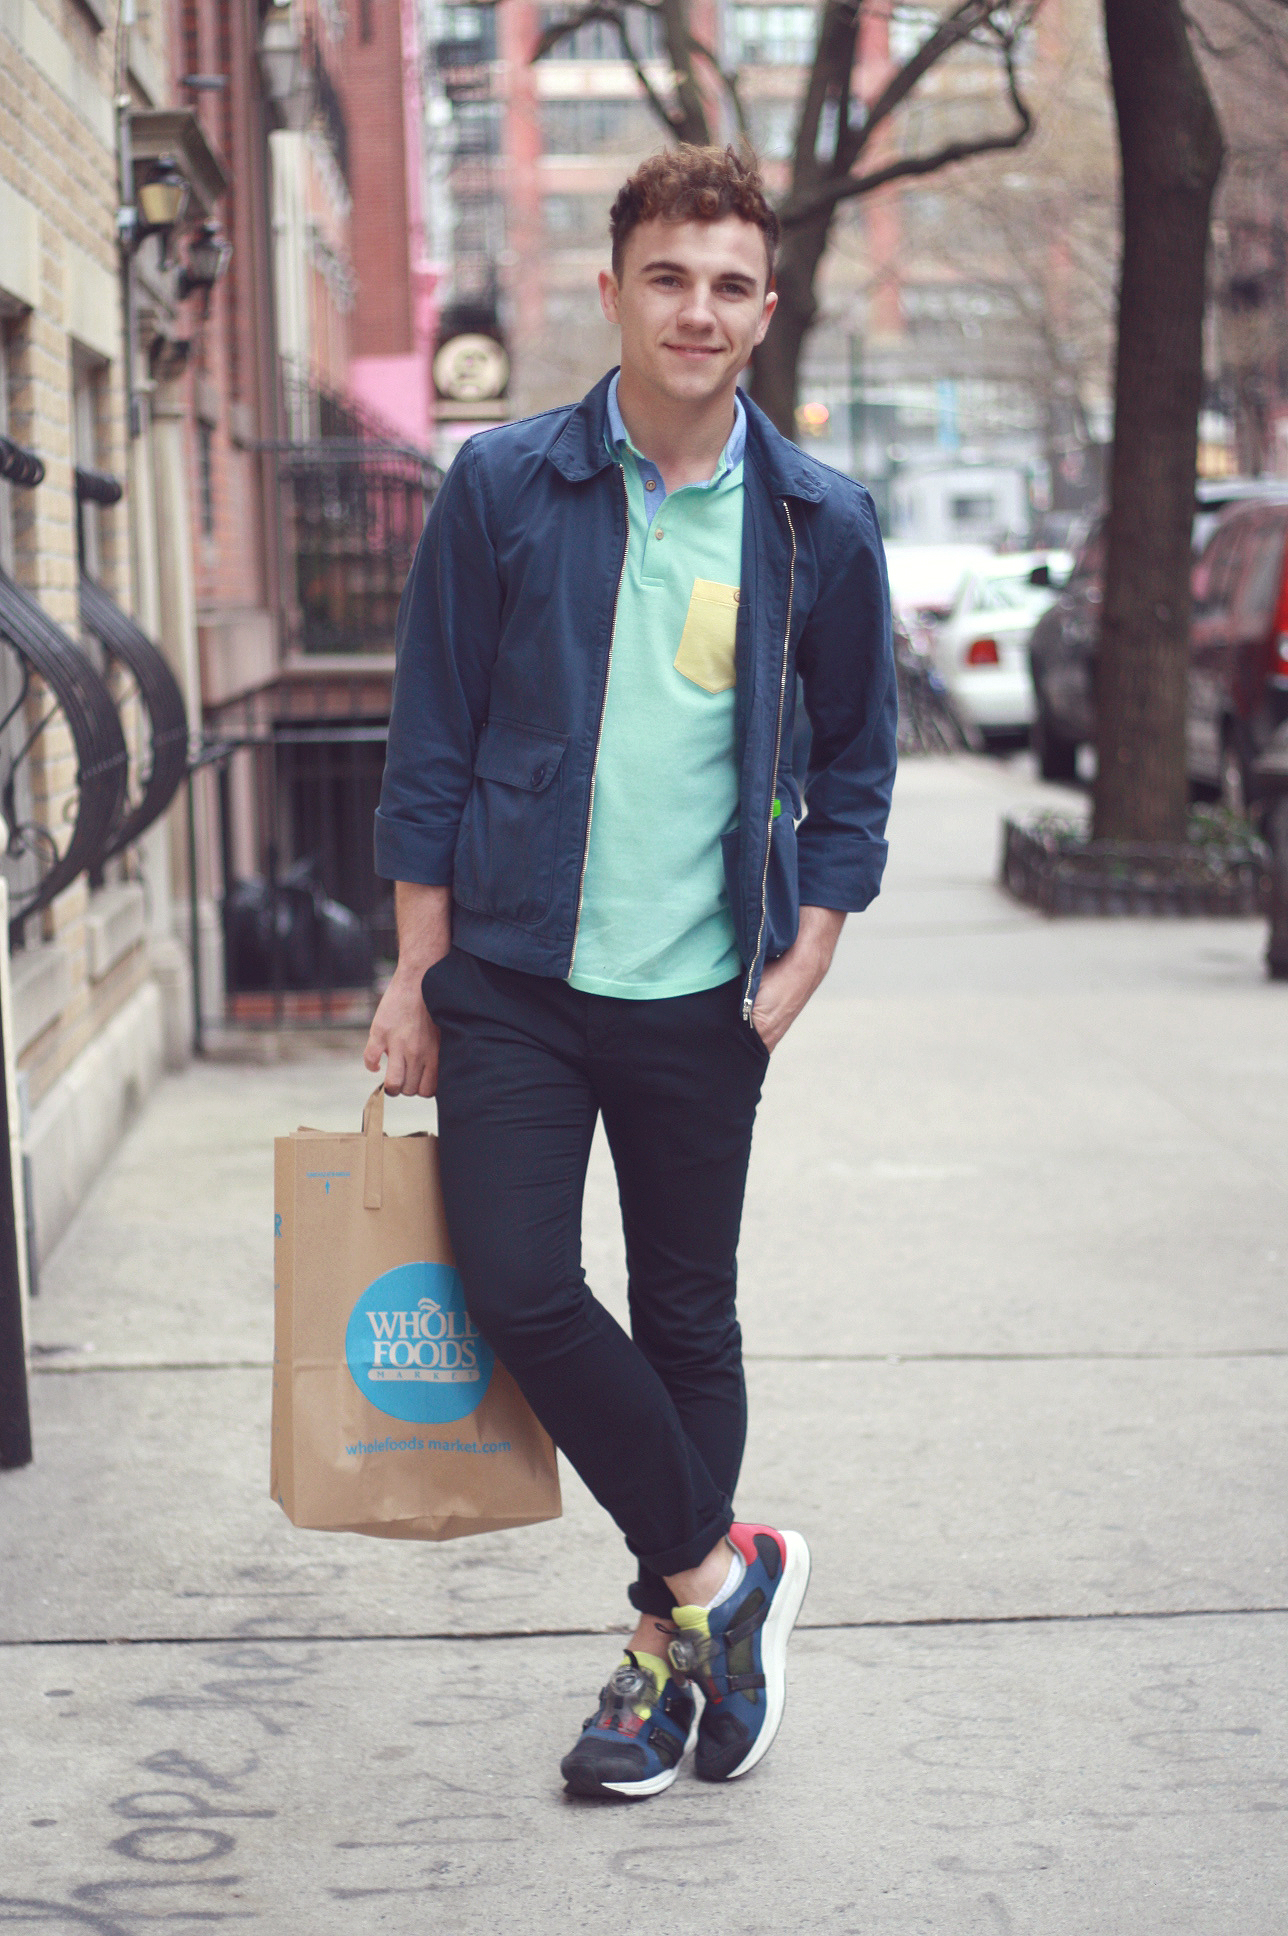 Scout Sixteen / Justin Livingston -- Ted Baker Polo, PUMA Hussein Chalayan Sneakers